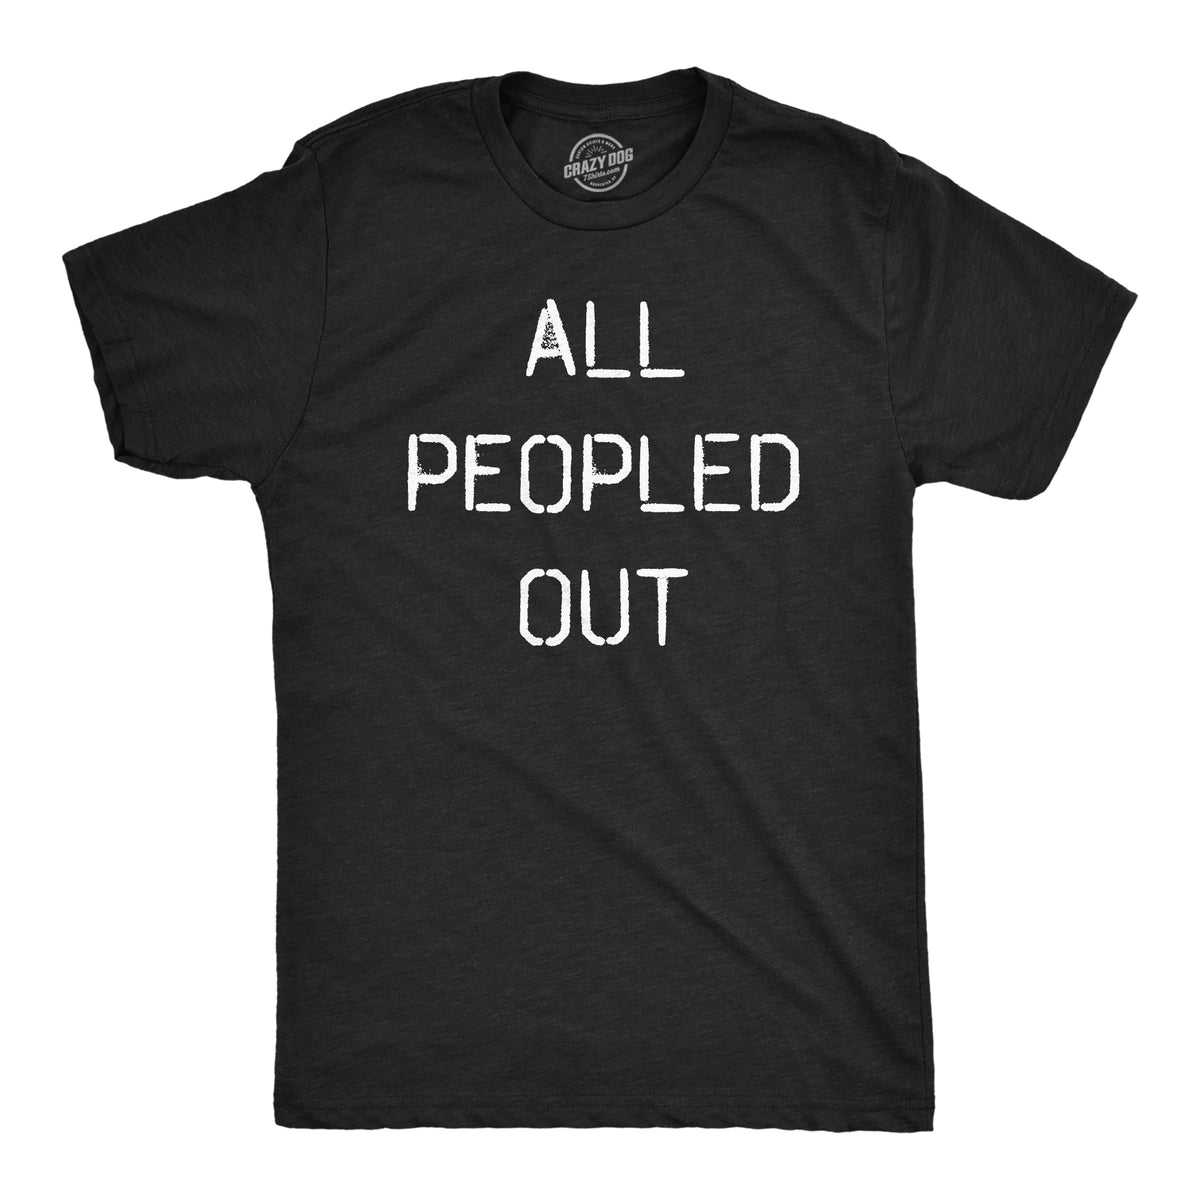 Funny Heather Black All Peopled Out Mens T Shirt Nerdy introvert Tee